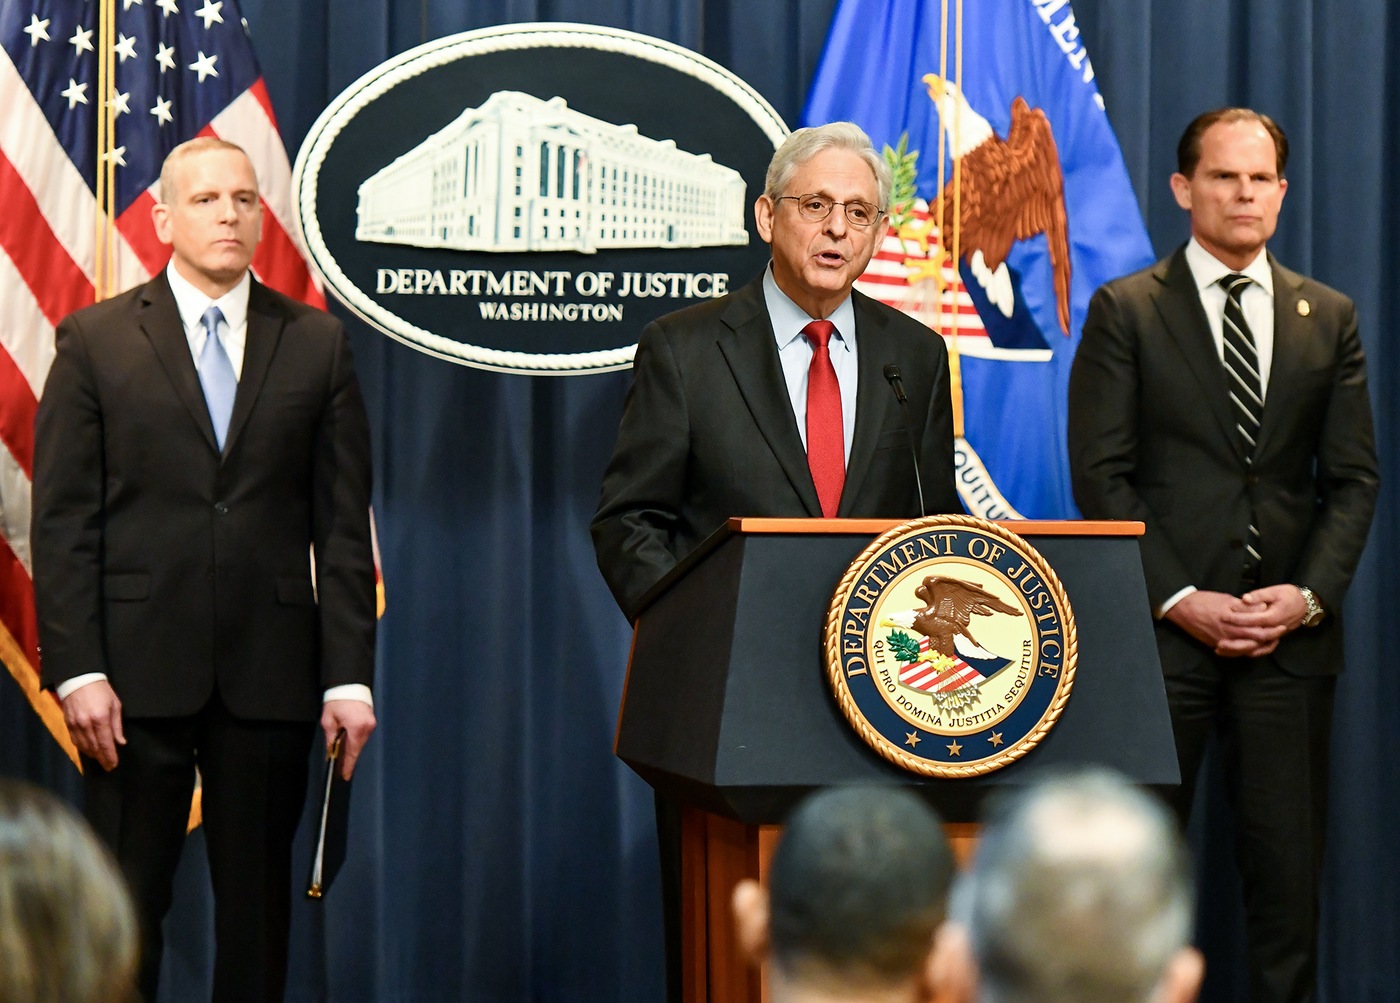 Attorney General Merrick Garland gives remarks at a press conference May 2, 2023, in Washington, D.C. With him is FBI Deputy Director Paul Abbate, left, and DEA Deputy Administrator Lou Milione.